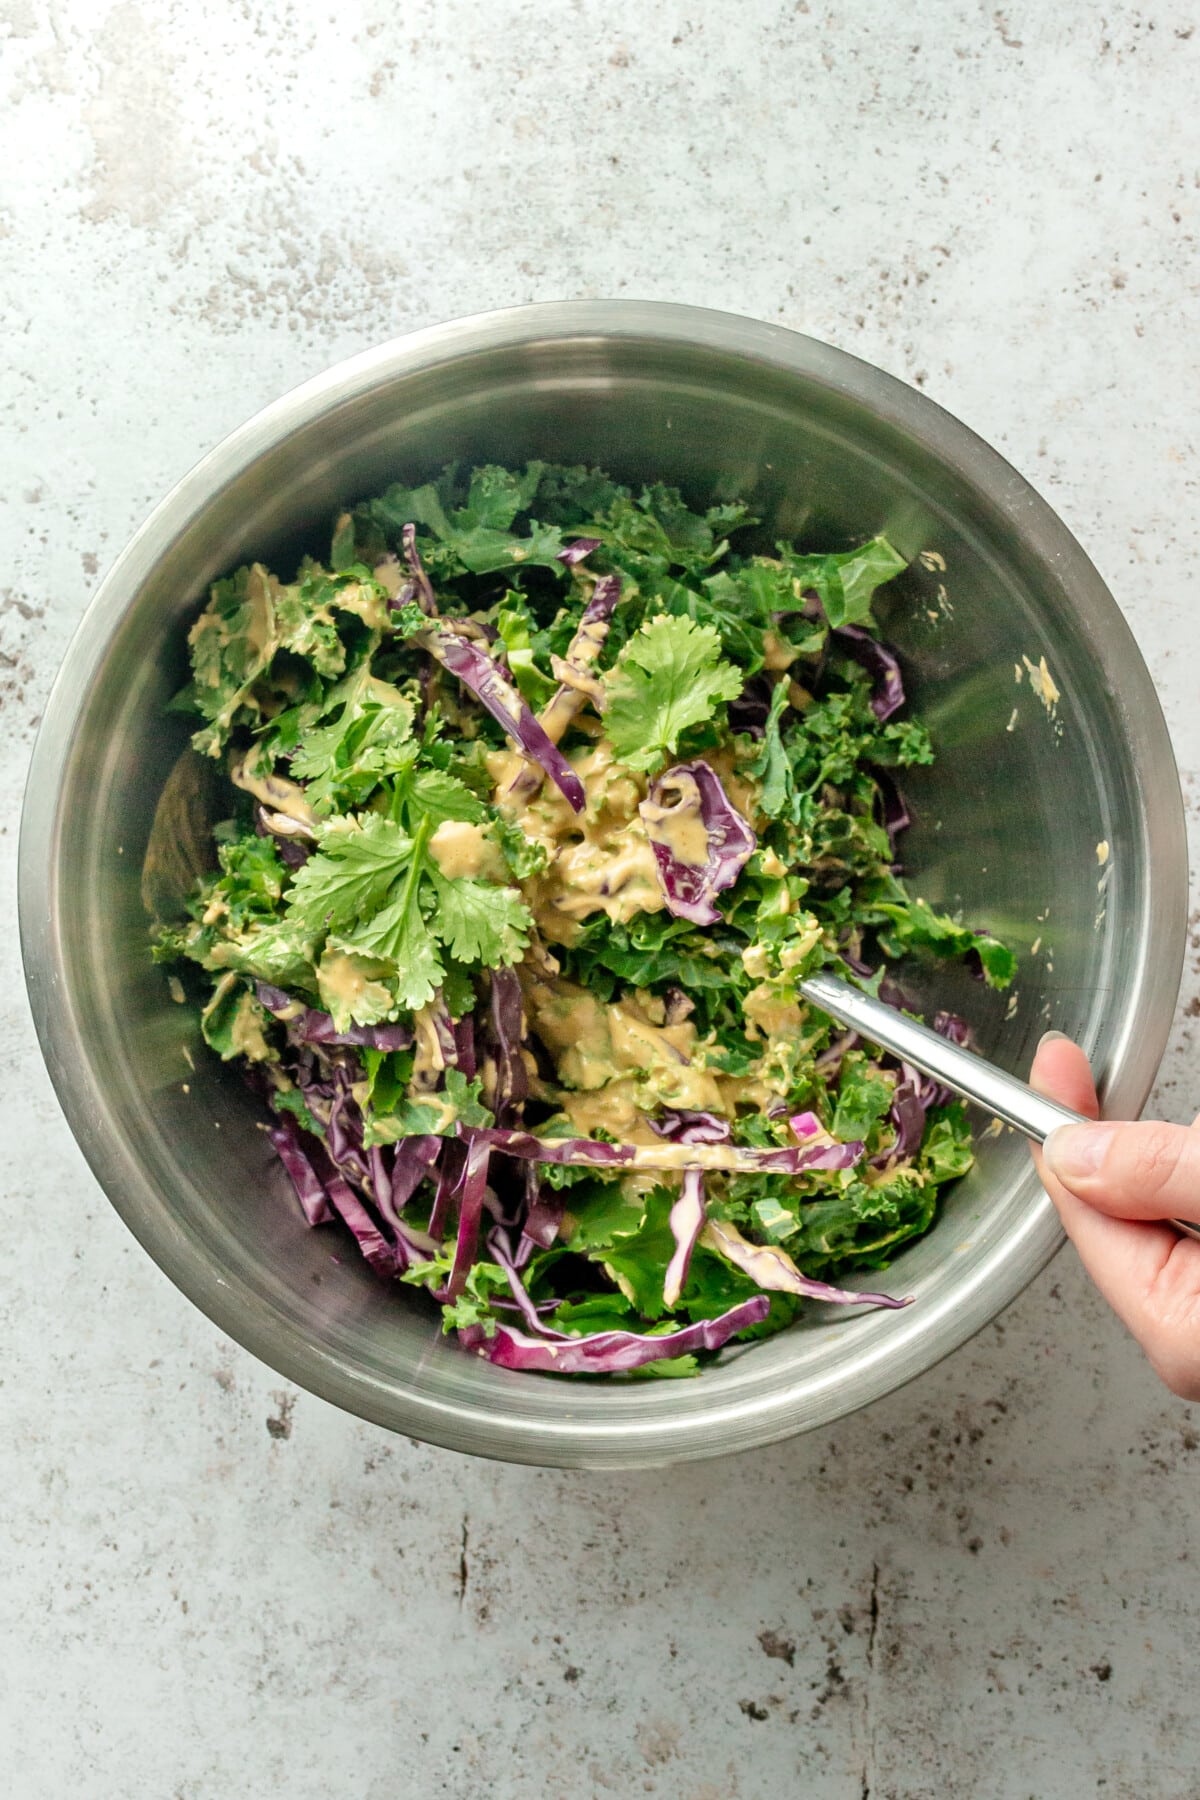 A dressing is stirred through a kale salad in a stainless steel bowl on a light grey surface.